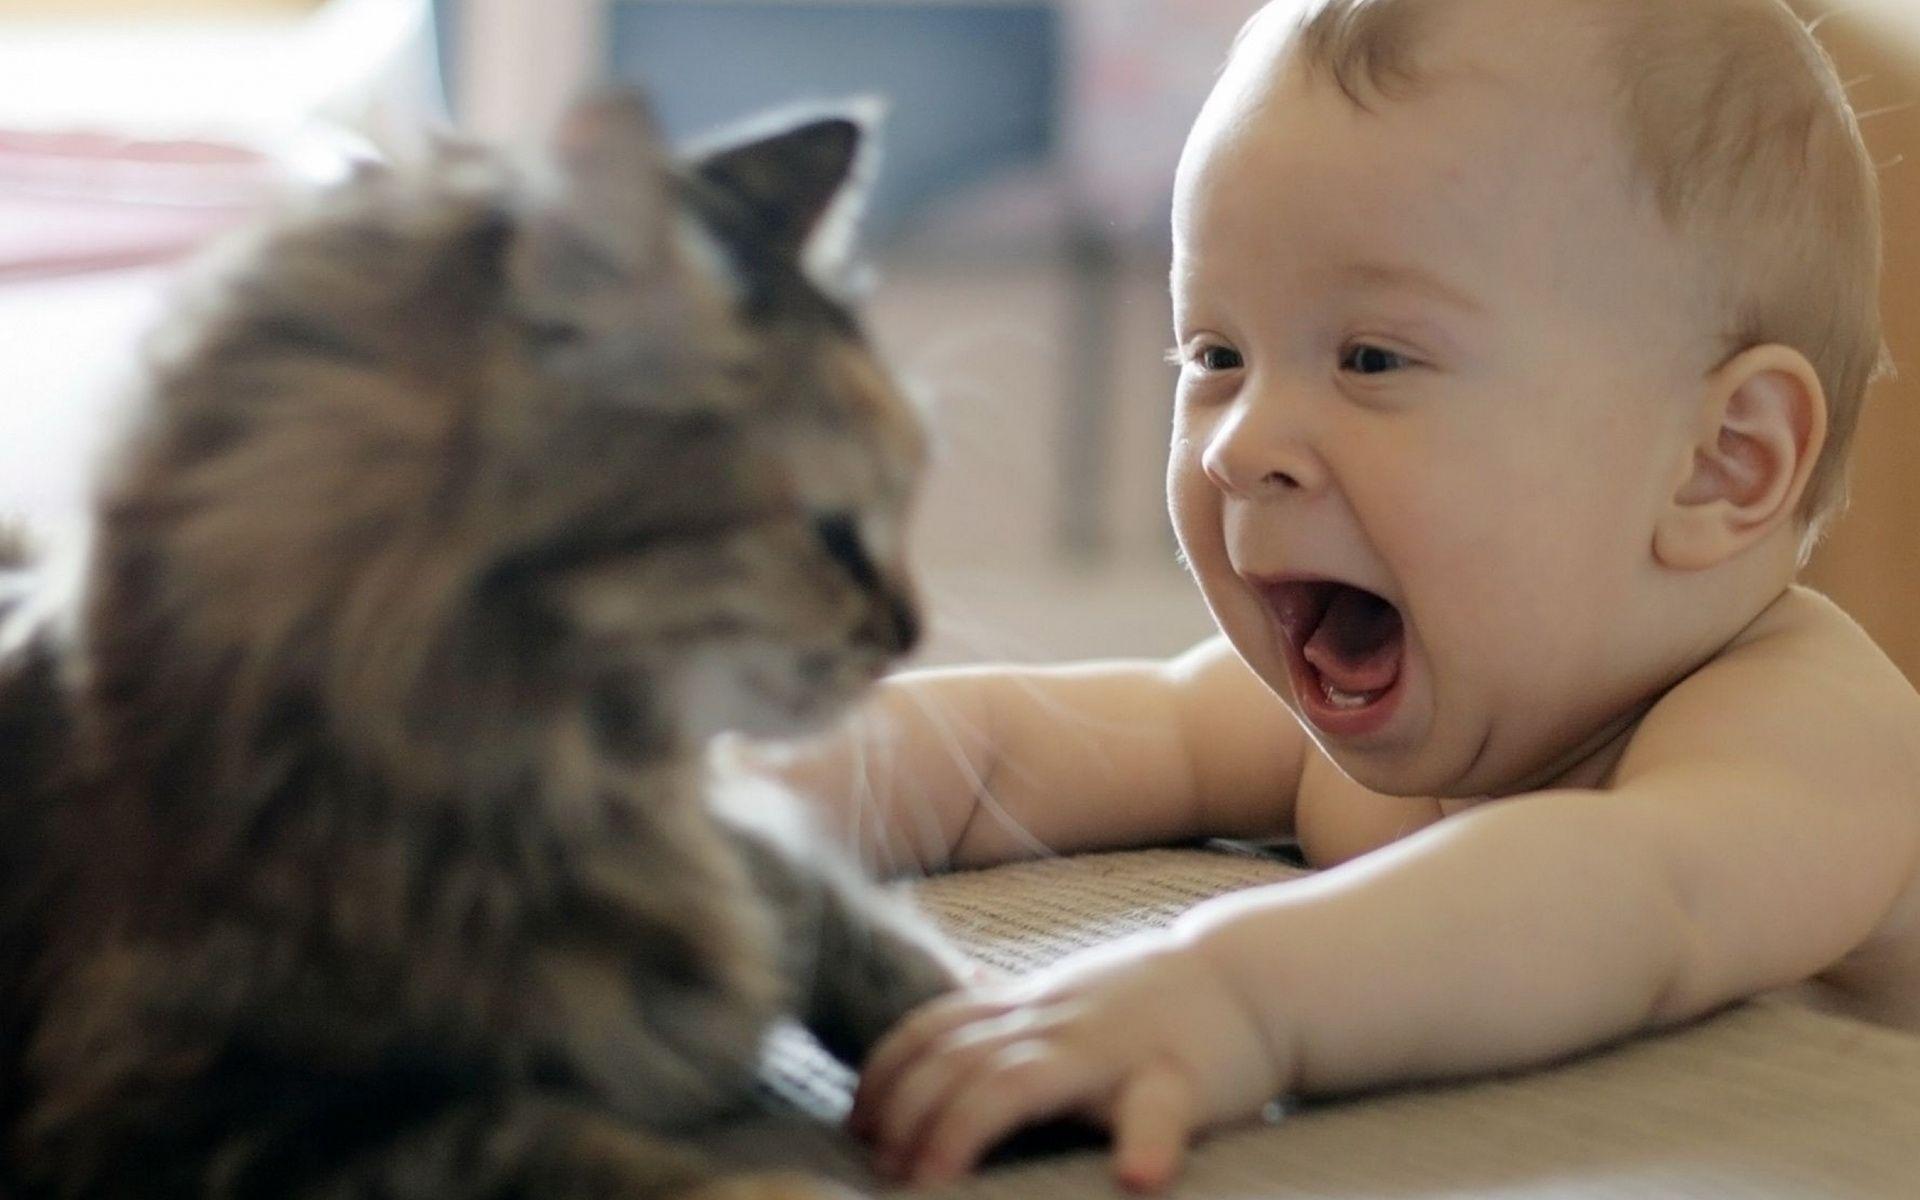 Funny baby wallpaper HD. Zem Wallpaper Is The Best Place Where